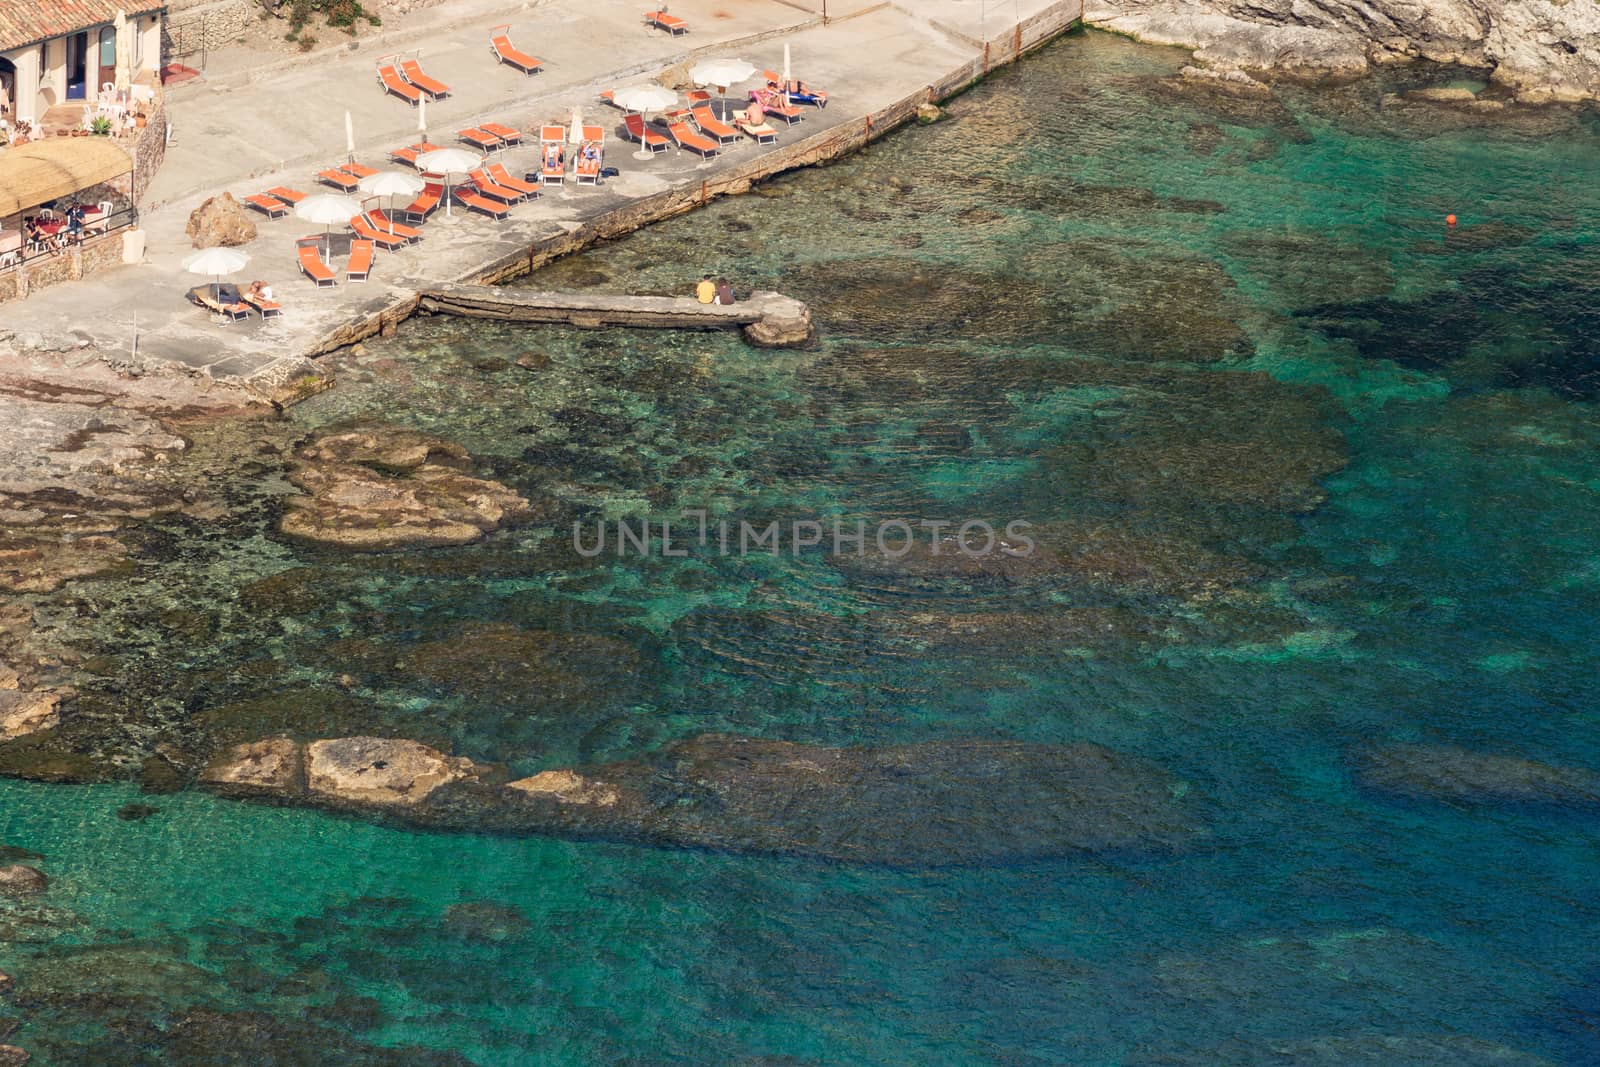 Aeral view of sicilian beach with people, umbrellas and wonderful sea.